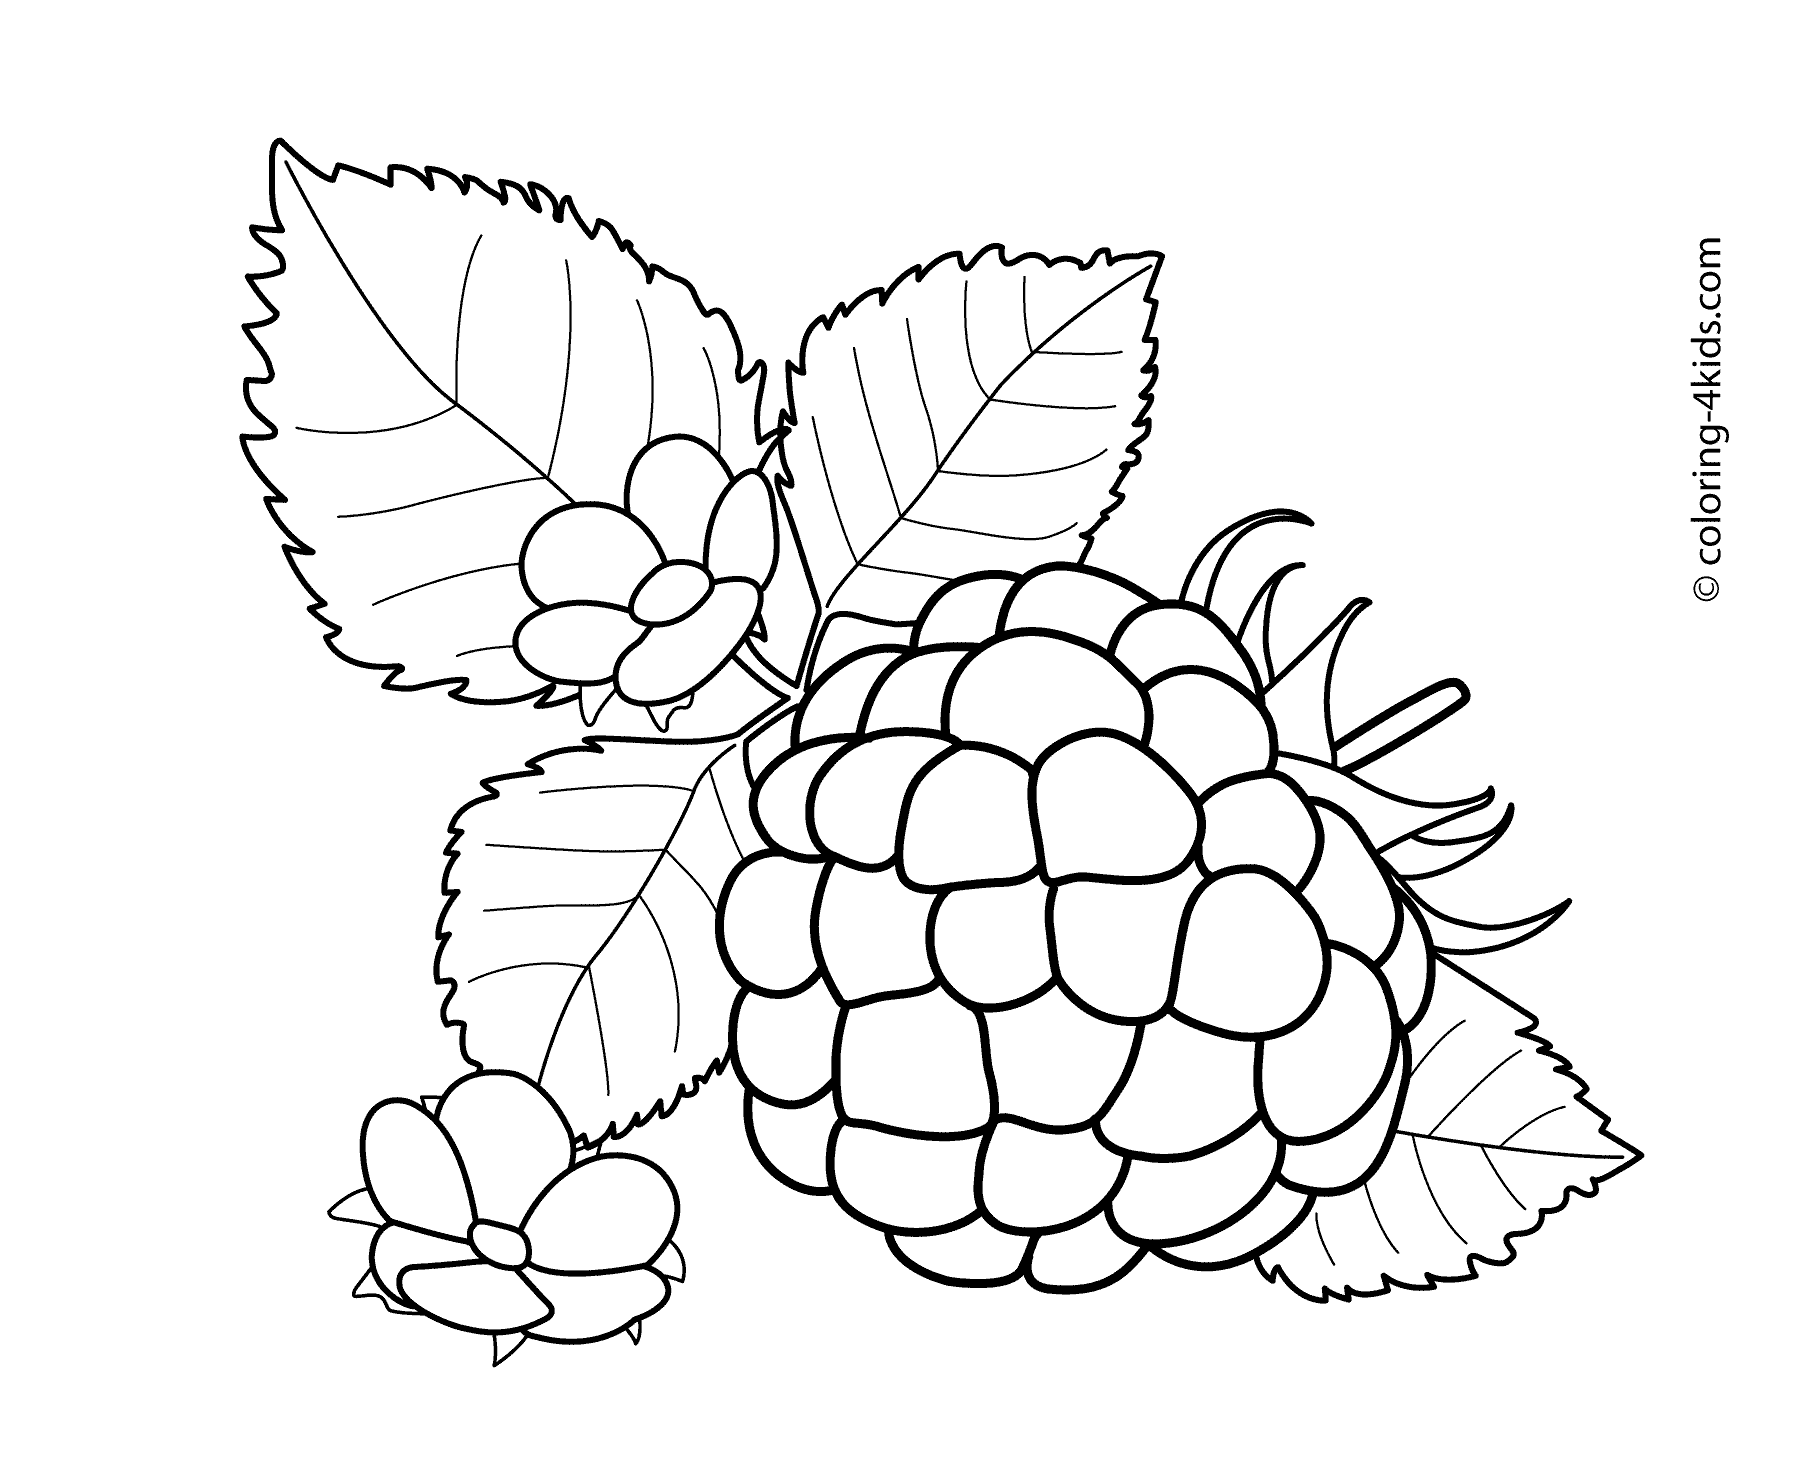 Raspberry with flowers fruits and berries coloring pages for kids printable free fruit coloring pages coloring pages coloring pages for kids